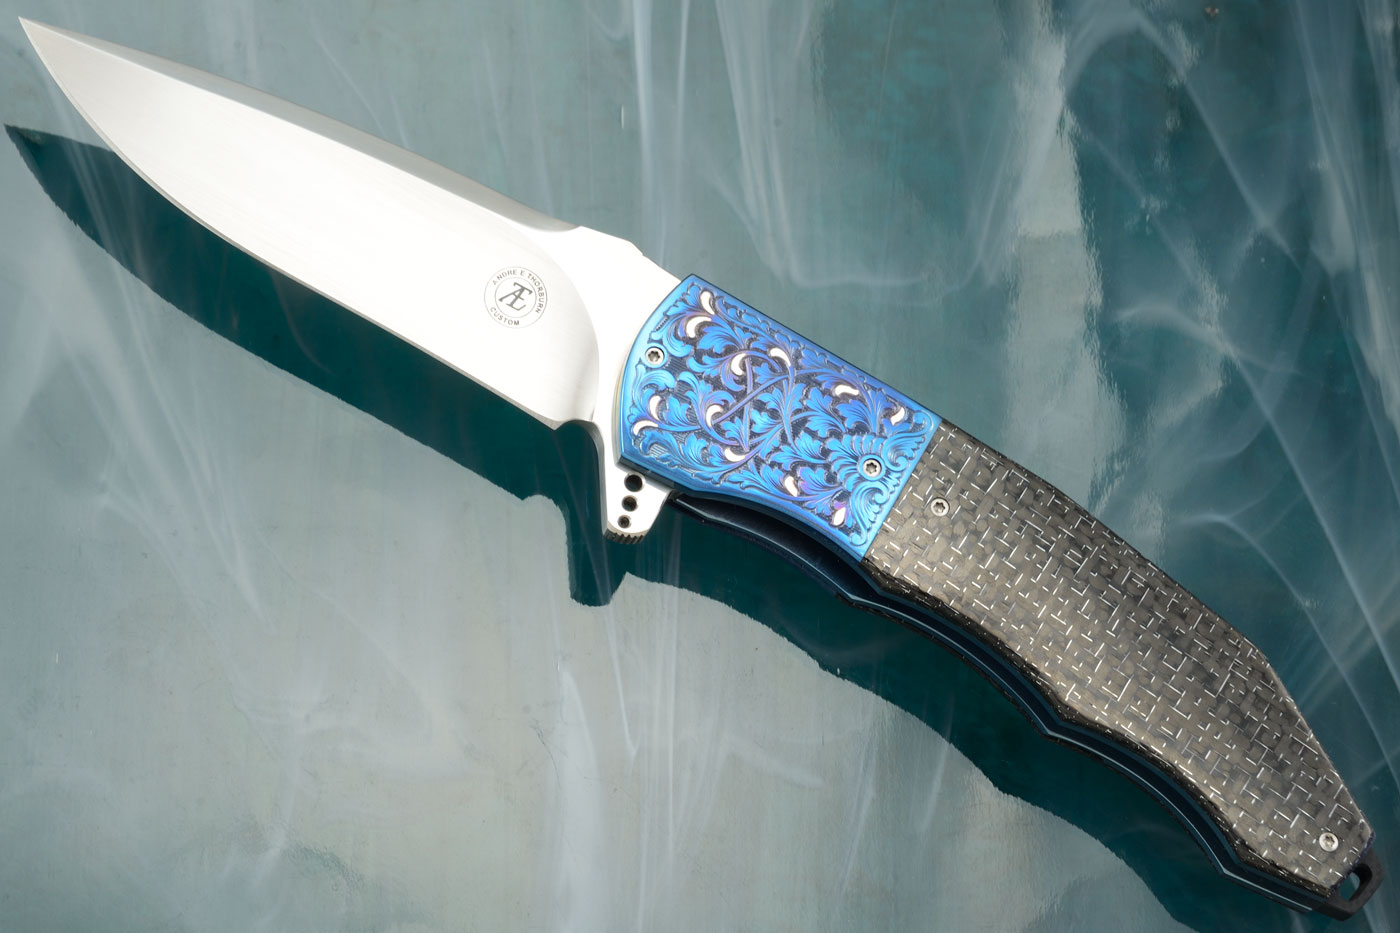 L53 Flipper with Silver Strike Carbon Fiber and Engraved Titanium with Silver Inlays (Ceramic IKBS) - CTS-XHP